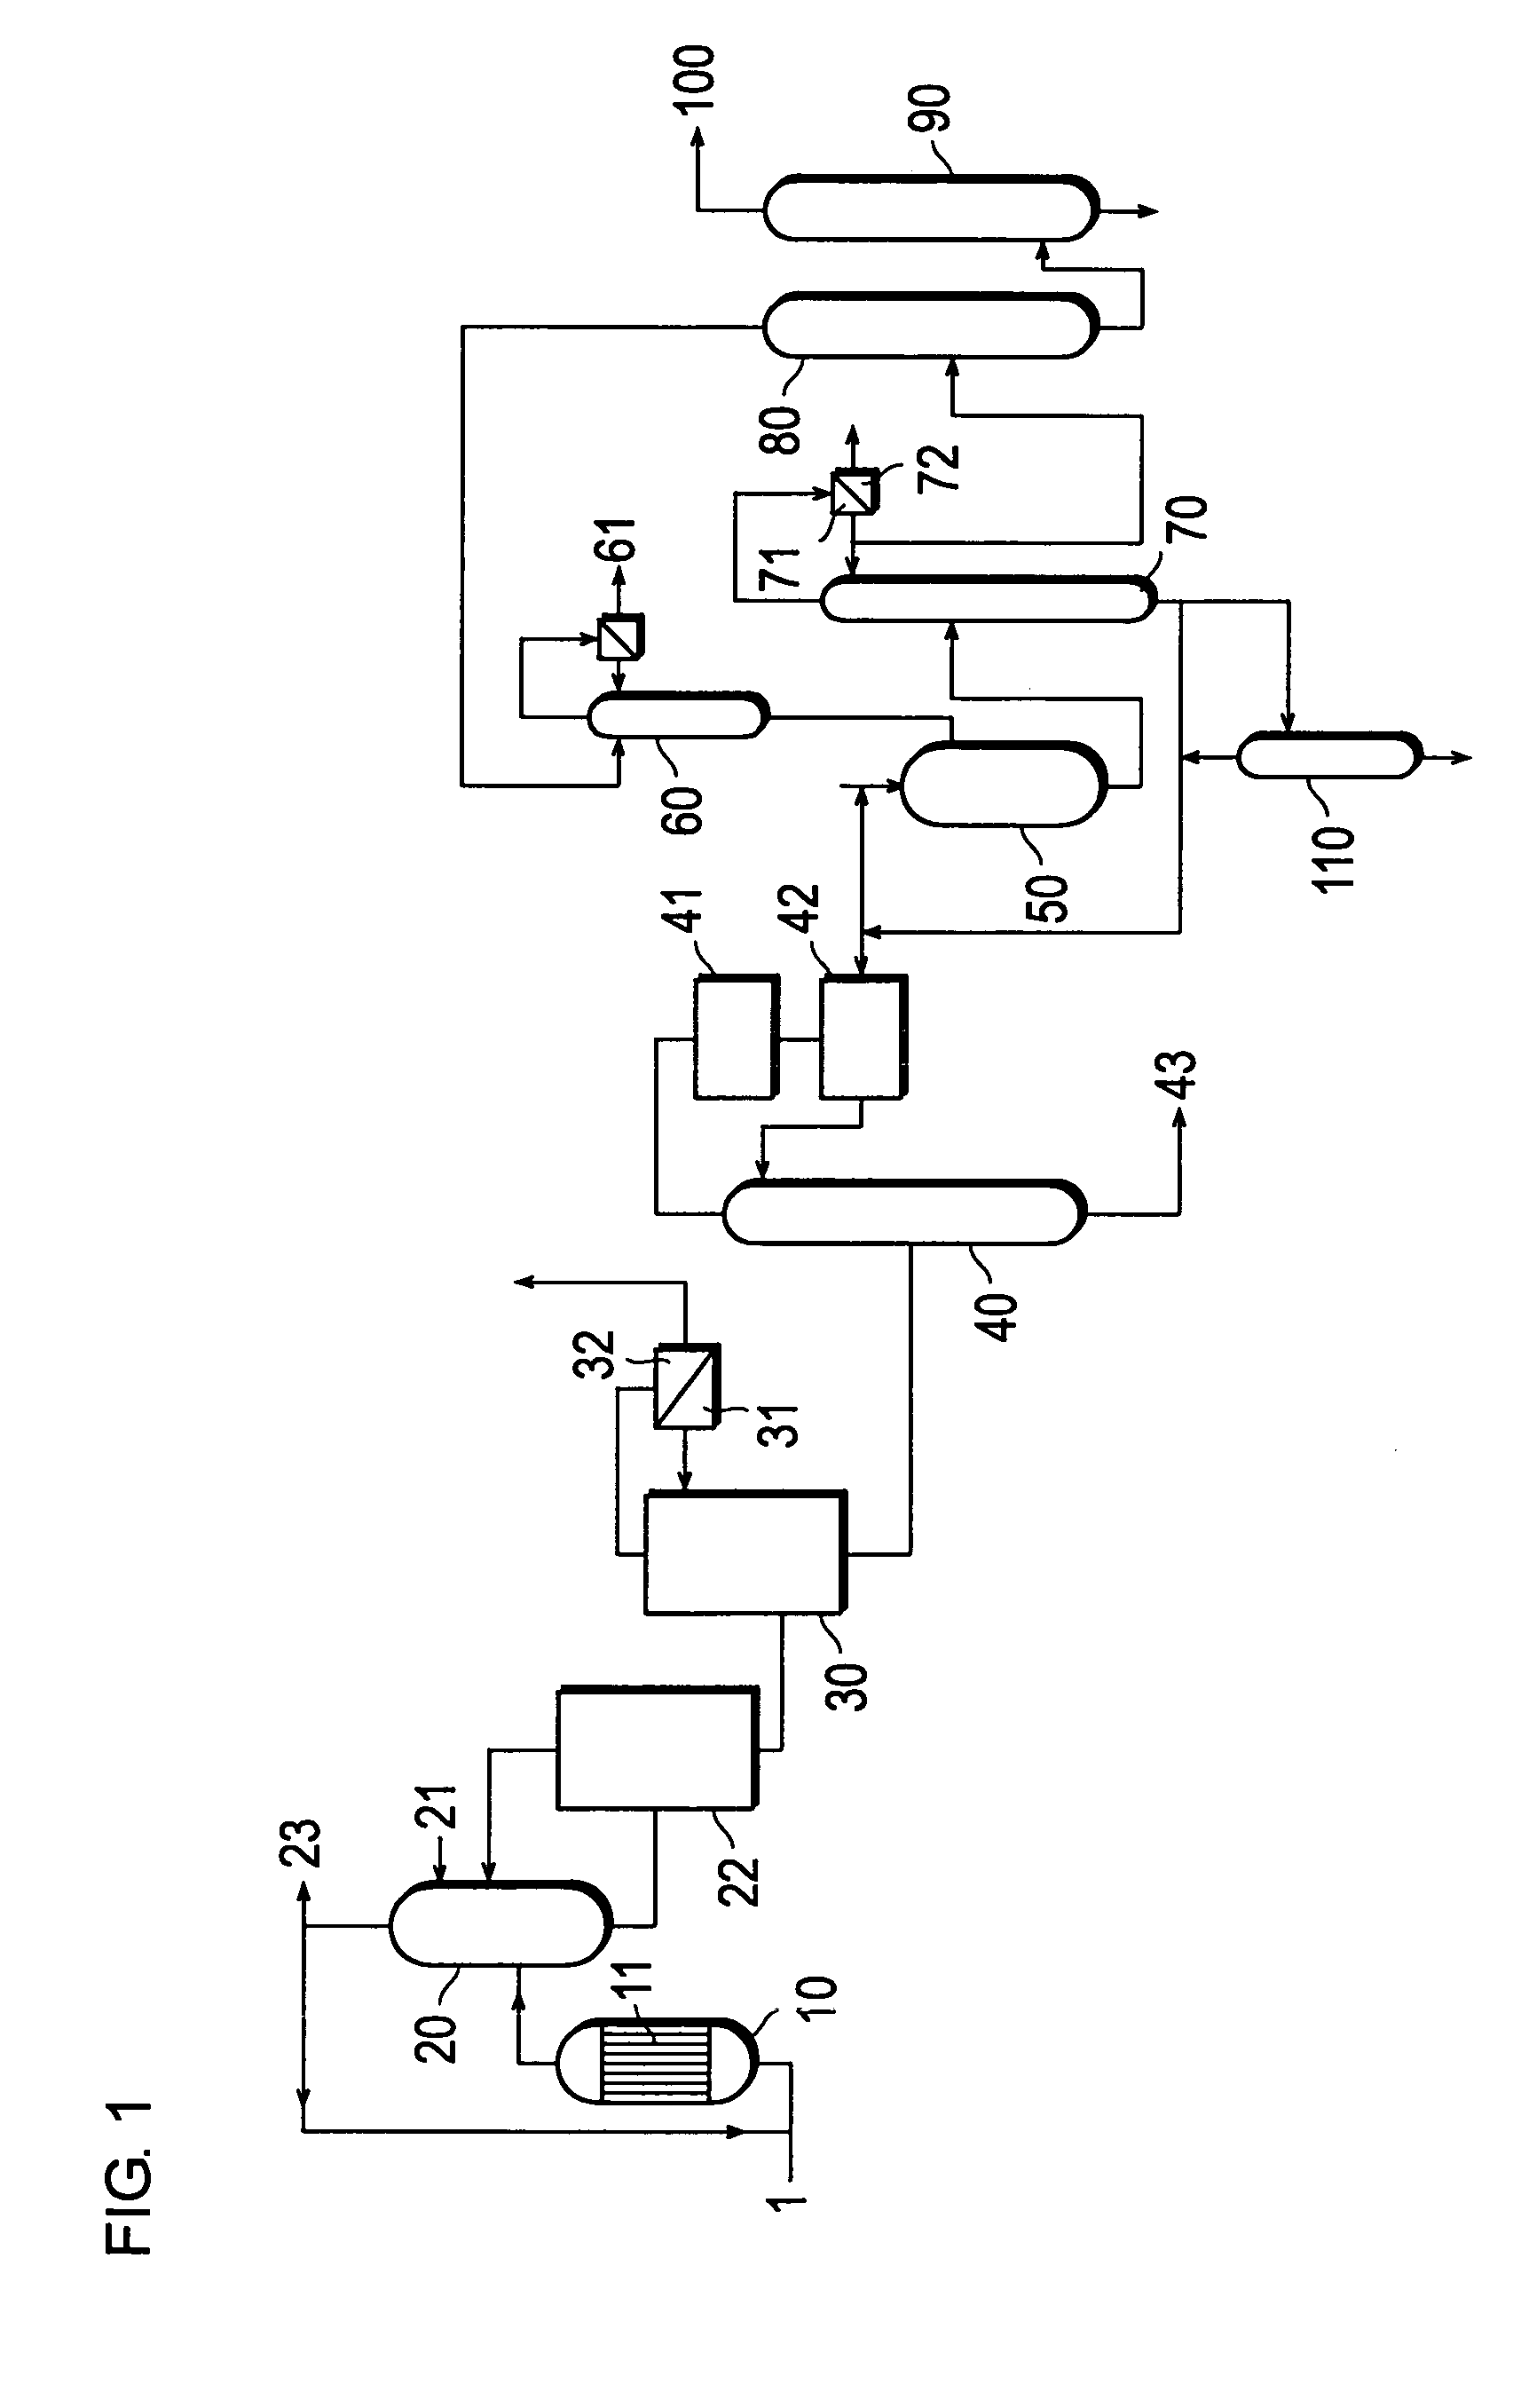 Method for disposal of waste from acrylic acid process and acrylic ester process